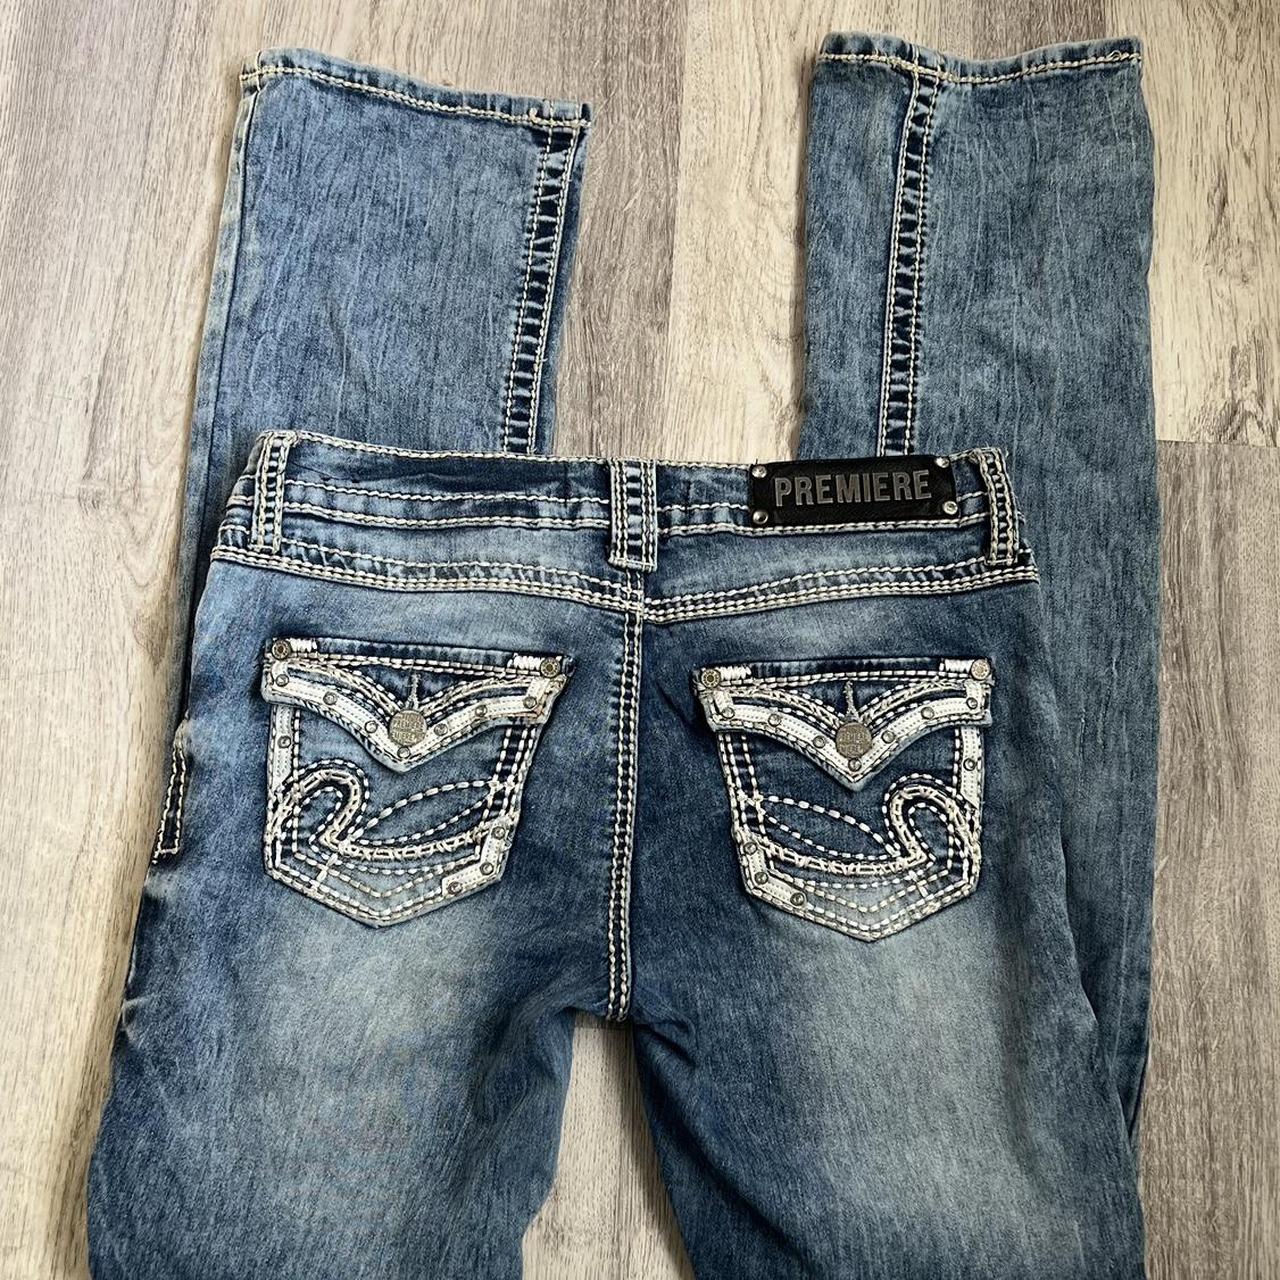 Y2K BEDAZZLED JEANS 👖 •size 5/6 •good condition... - Depop